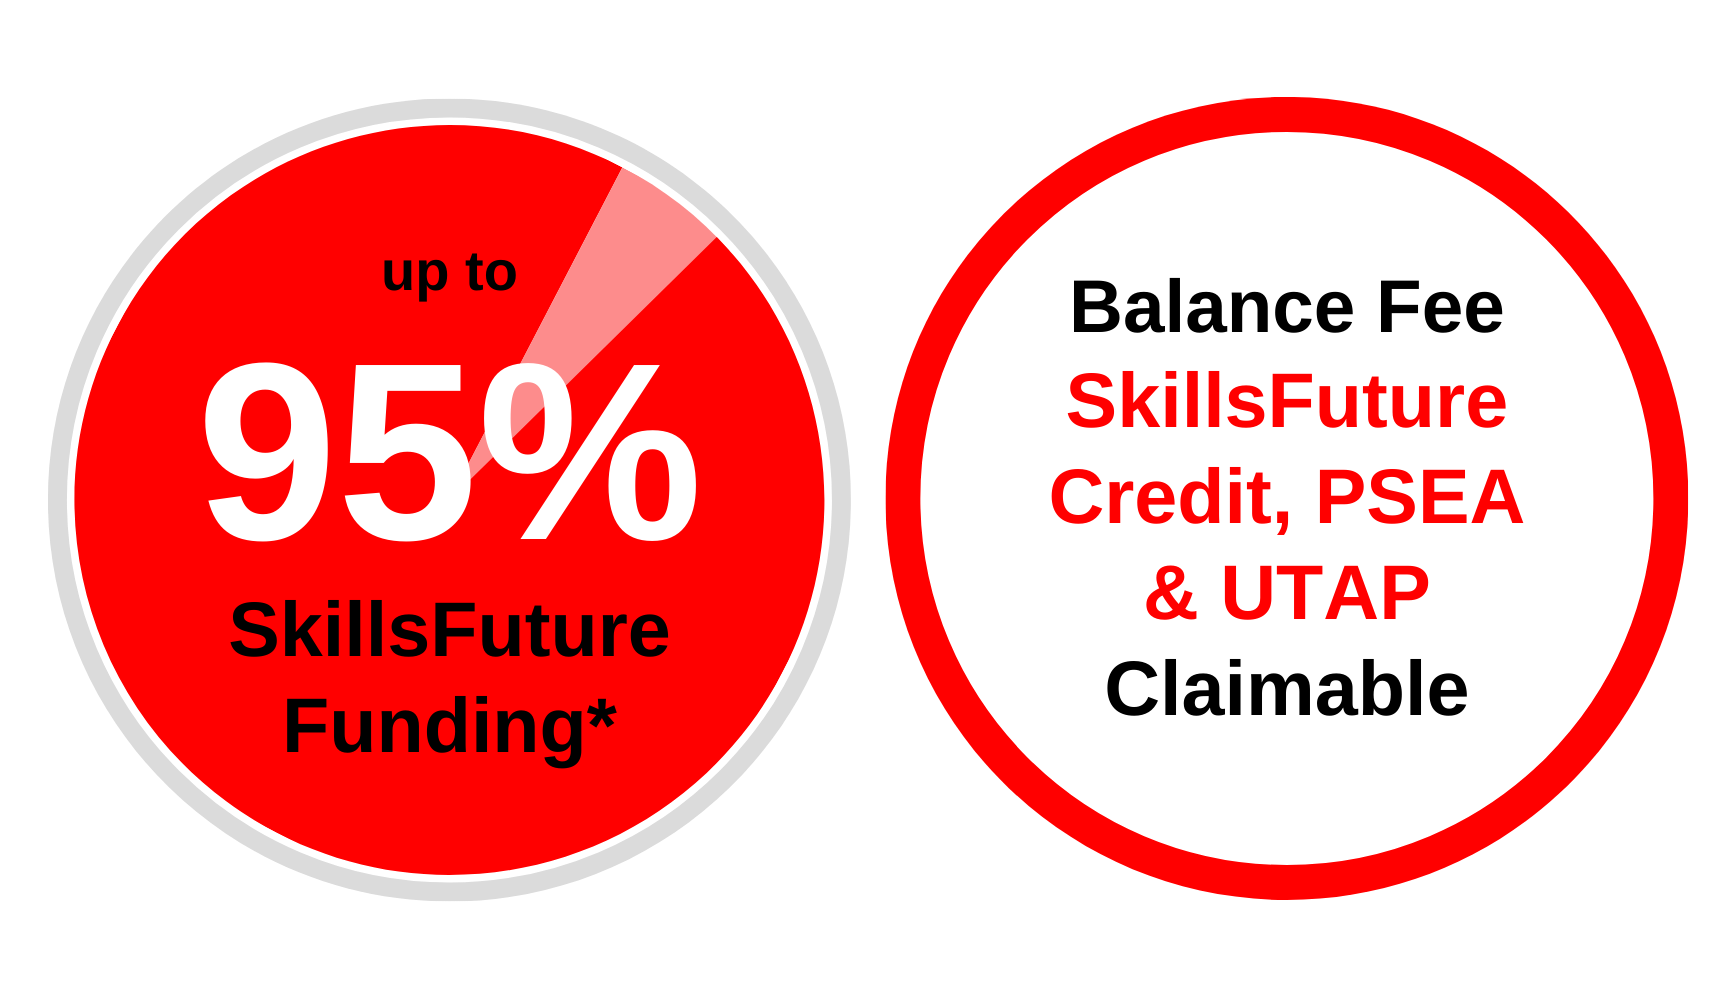 (SCTP) Advanced Certificate in Digital Marketing - Get up to 95% SkillsFuture Singapore Funding Diagram